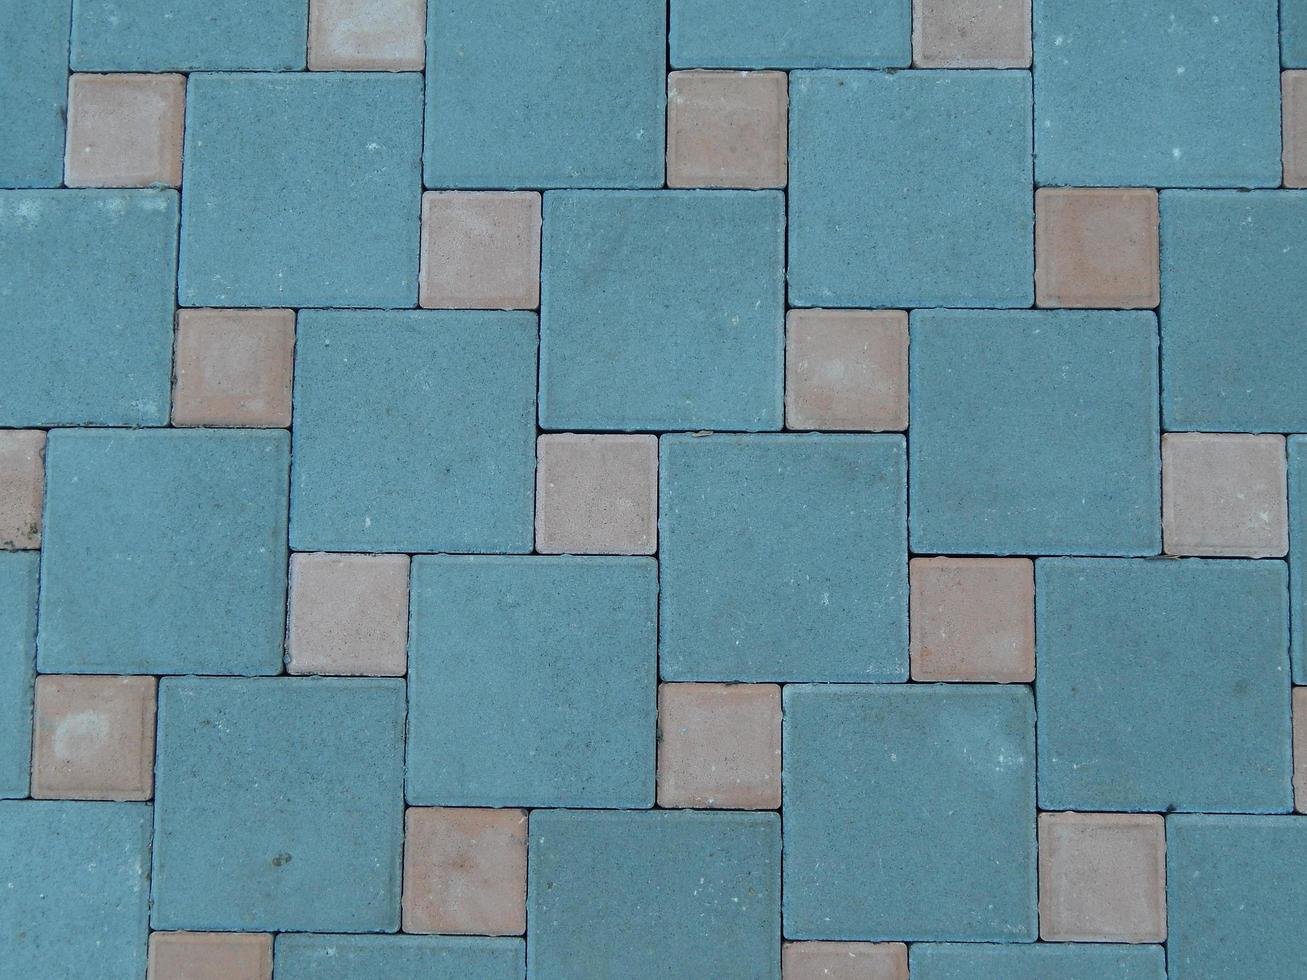 The texture of the tiles on the road paving of the paving photo